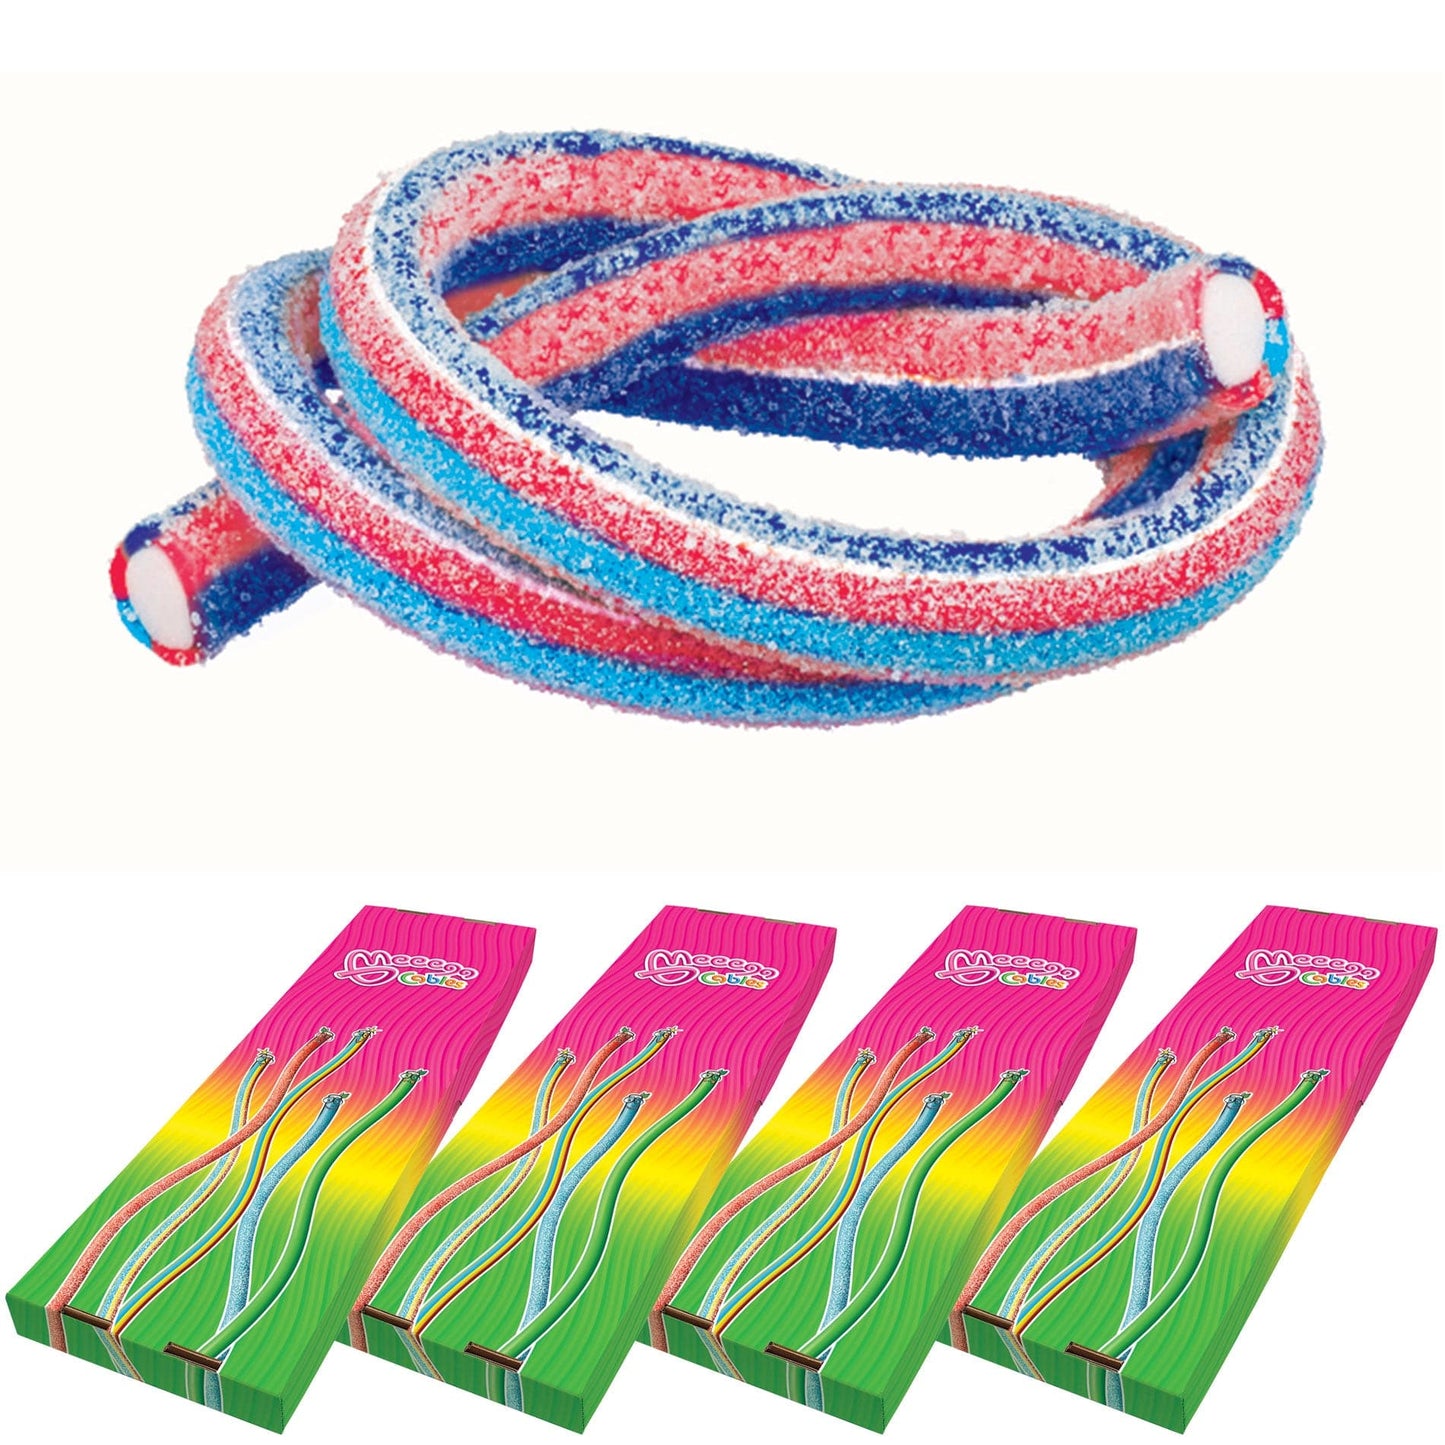 Novelty Concessions Gummy Rope FIZZY BERRY / 4 Pack (120 pieces) Meeega Cables European Chewy Rope Candy - Box of 30 individually wrapped Meeega Cables, each over 2-feet long cups with lids and straws